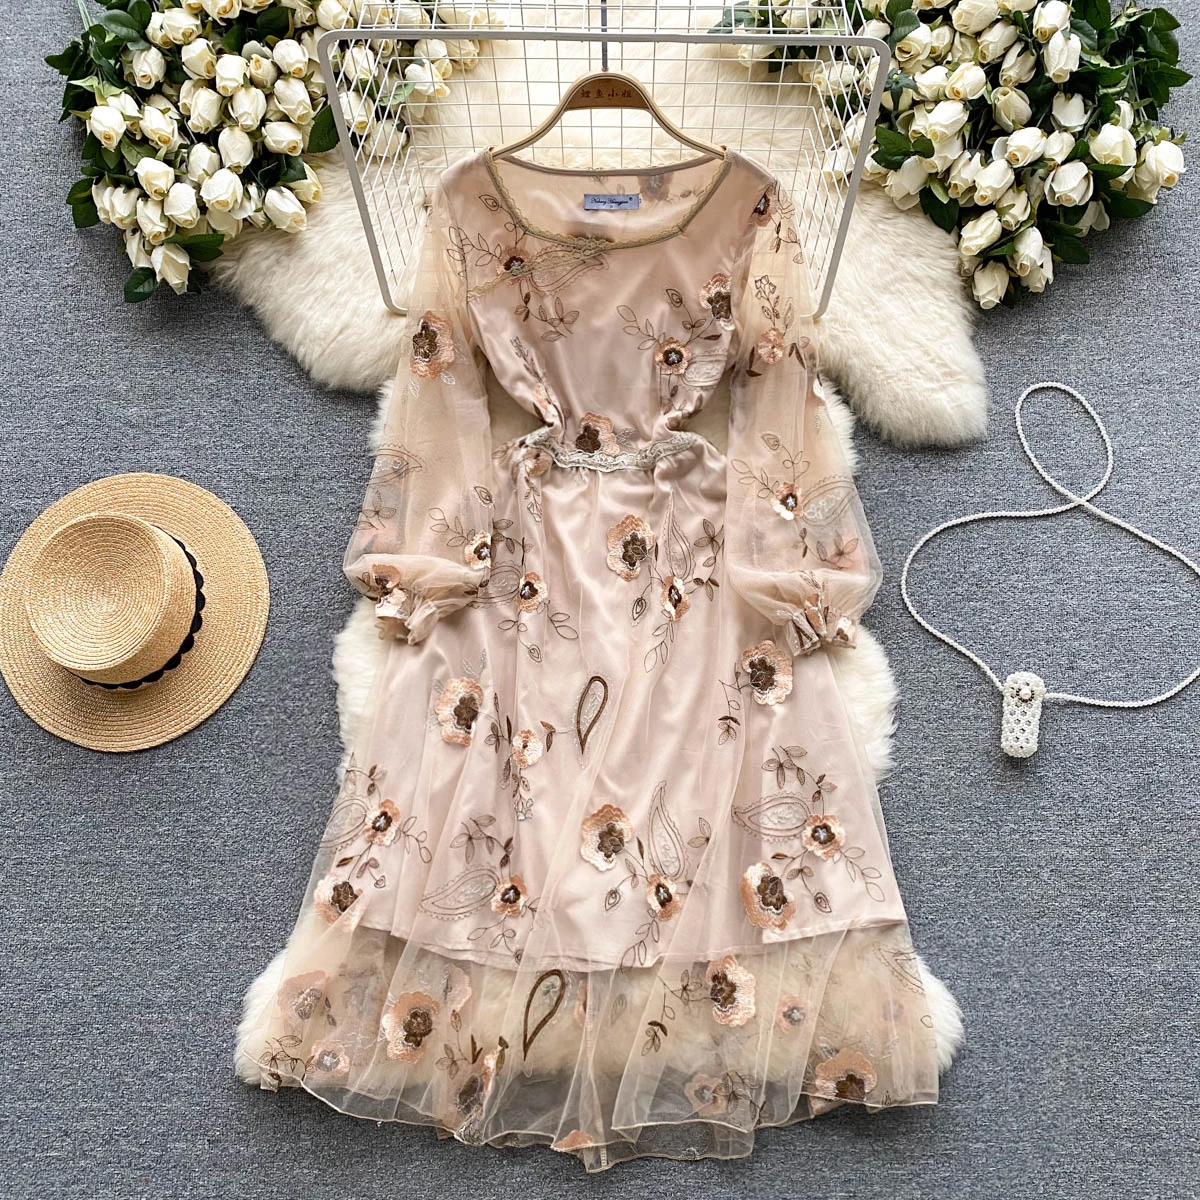 

French Court Gauze A-line Dress Women New Fashion Summer Embroidered Long Sleeve Chic Party Clothing Vestido Feminino K885